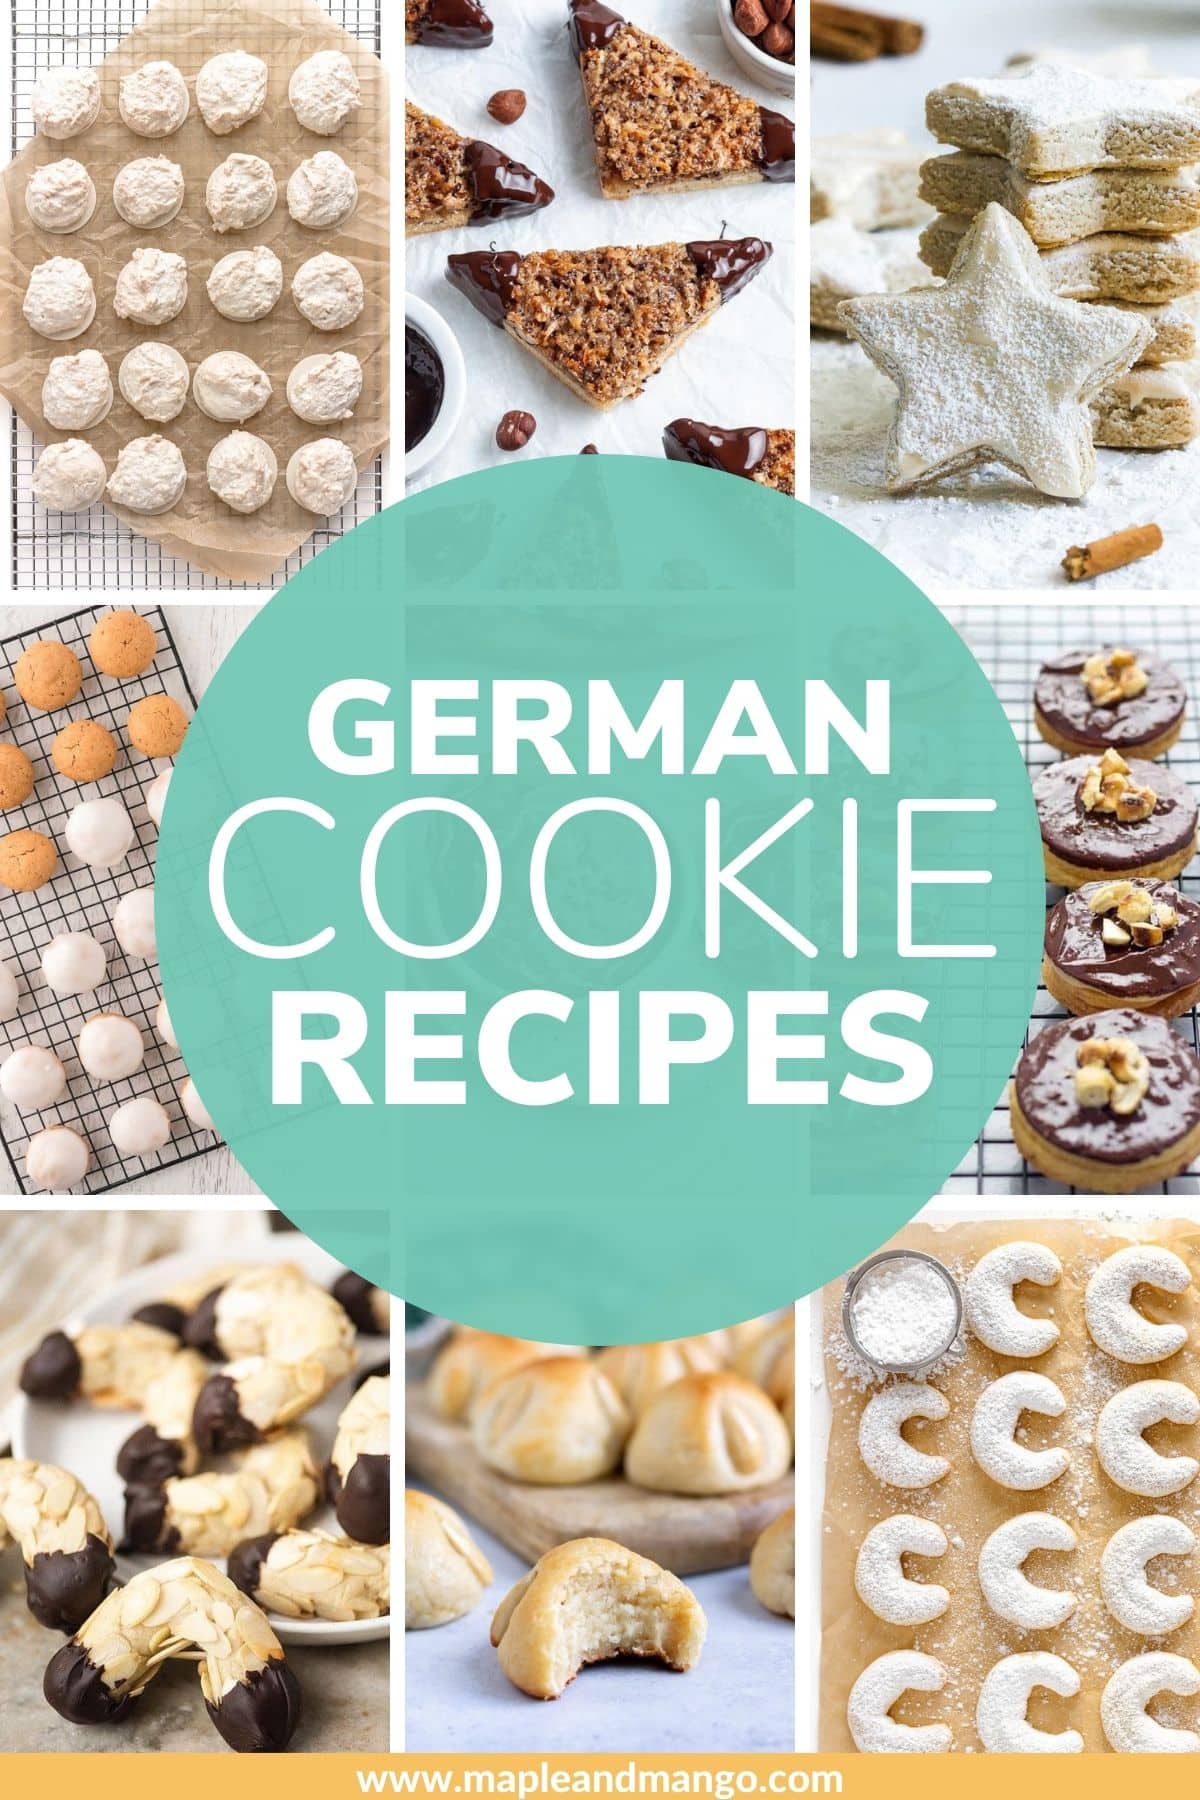 Photo collage of cookies with text overlay "German Cookie Recipes".